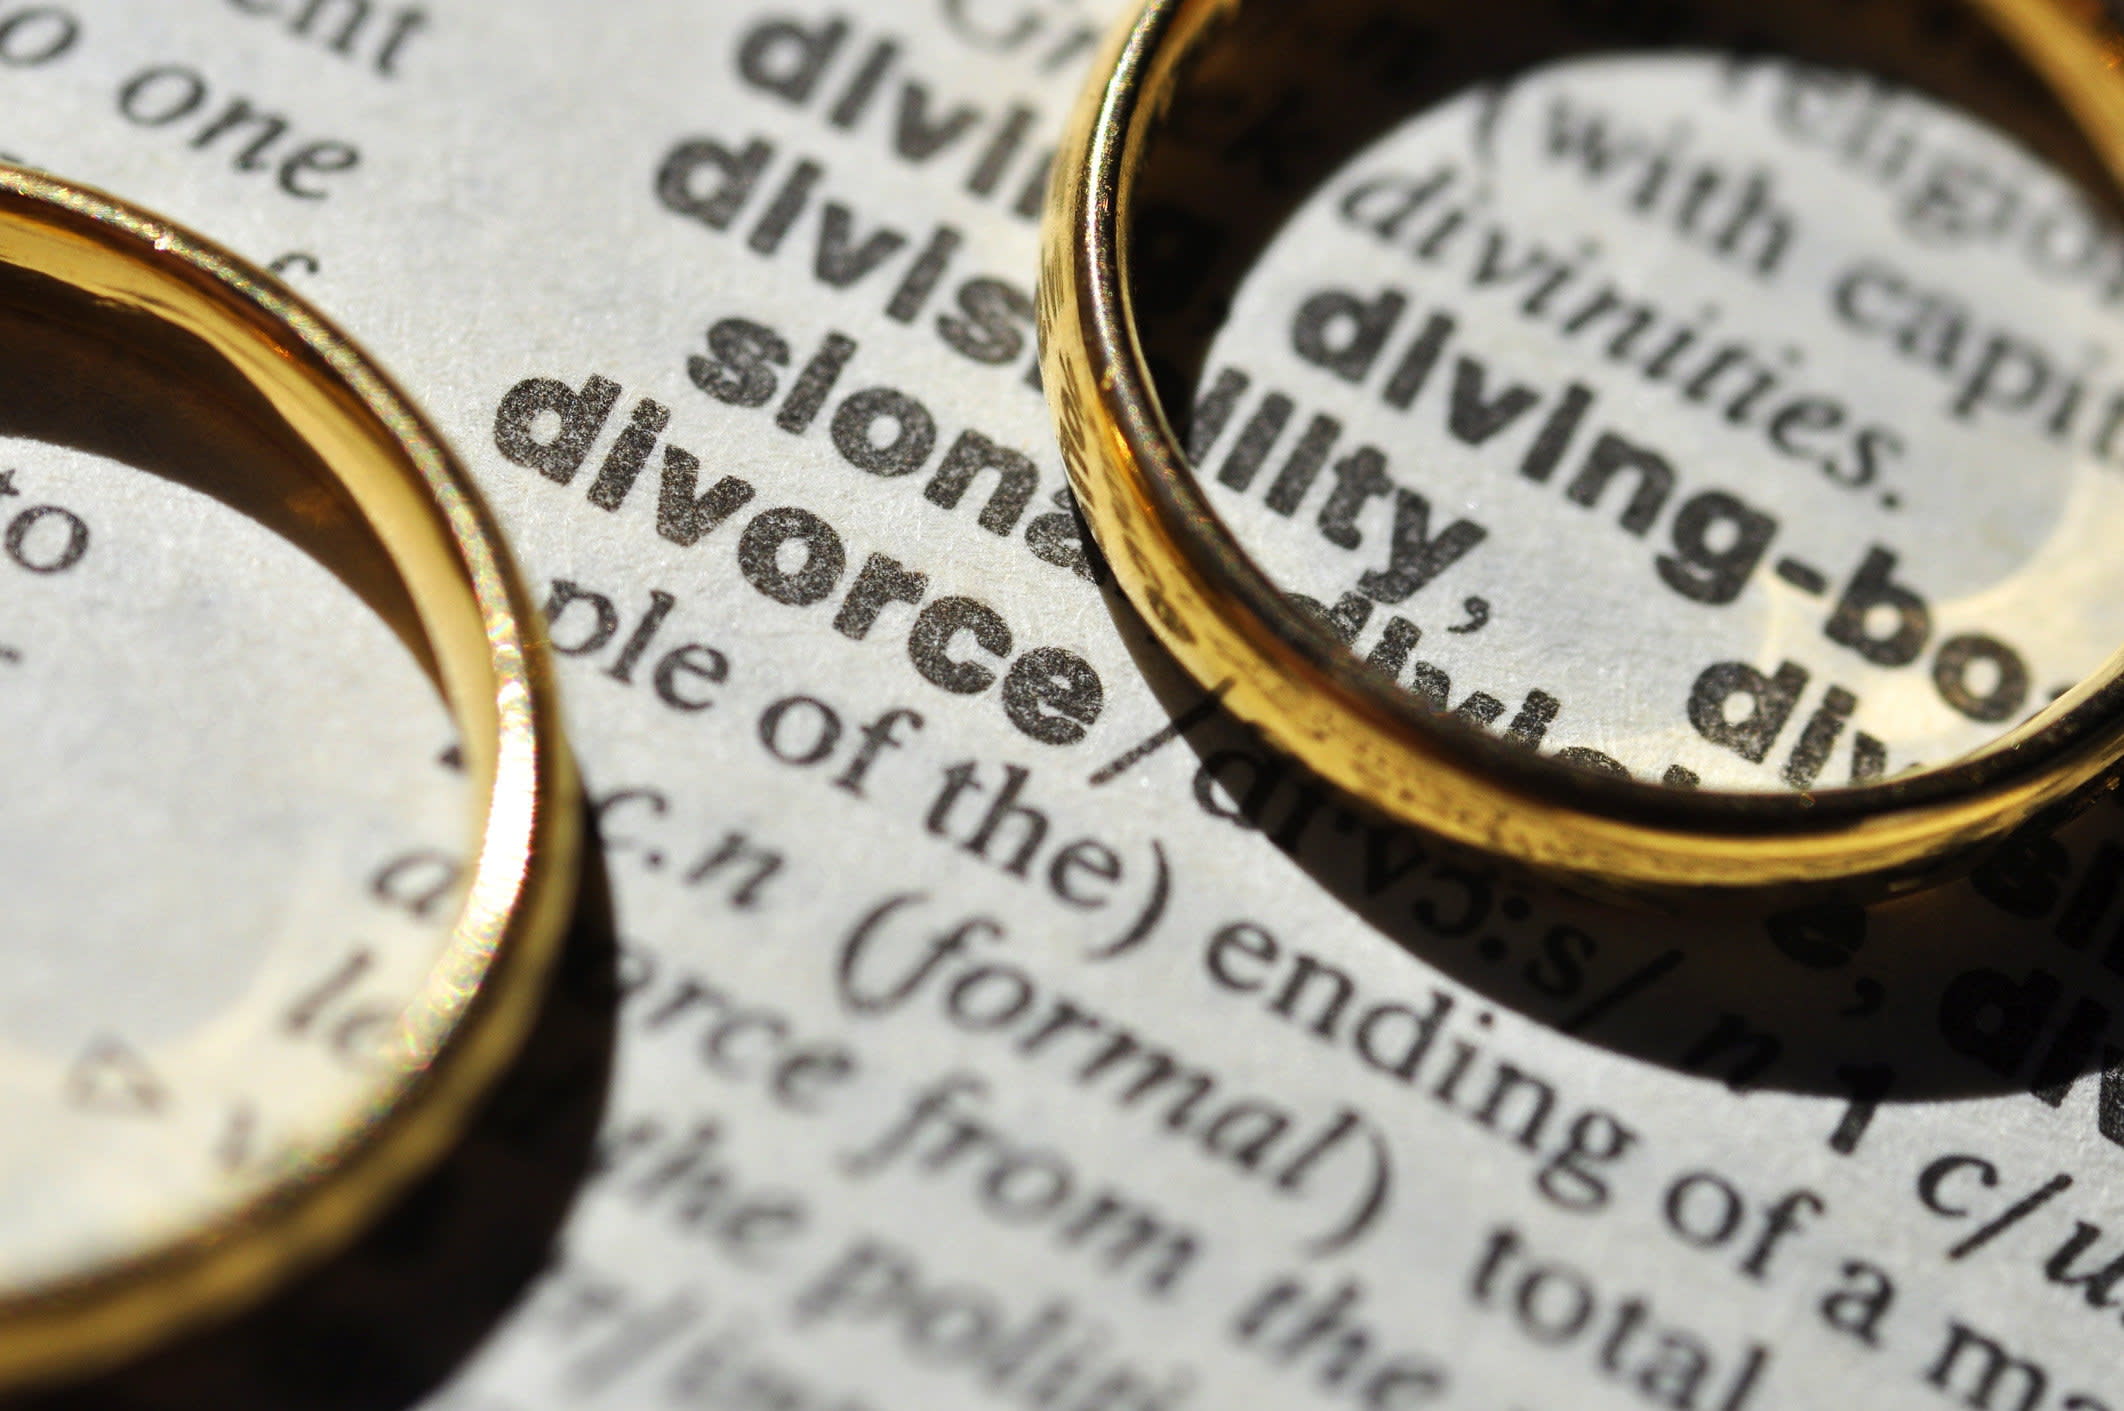 Only 7% of divorcees would consult a financial adviser